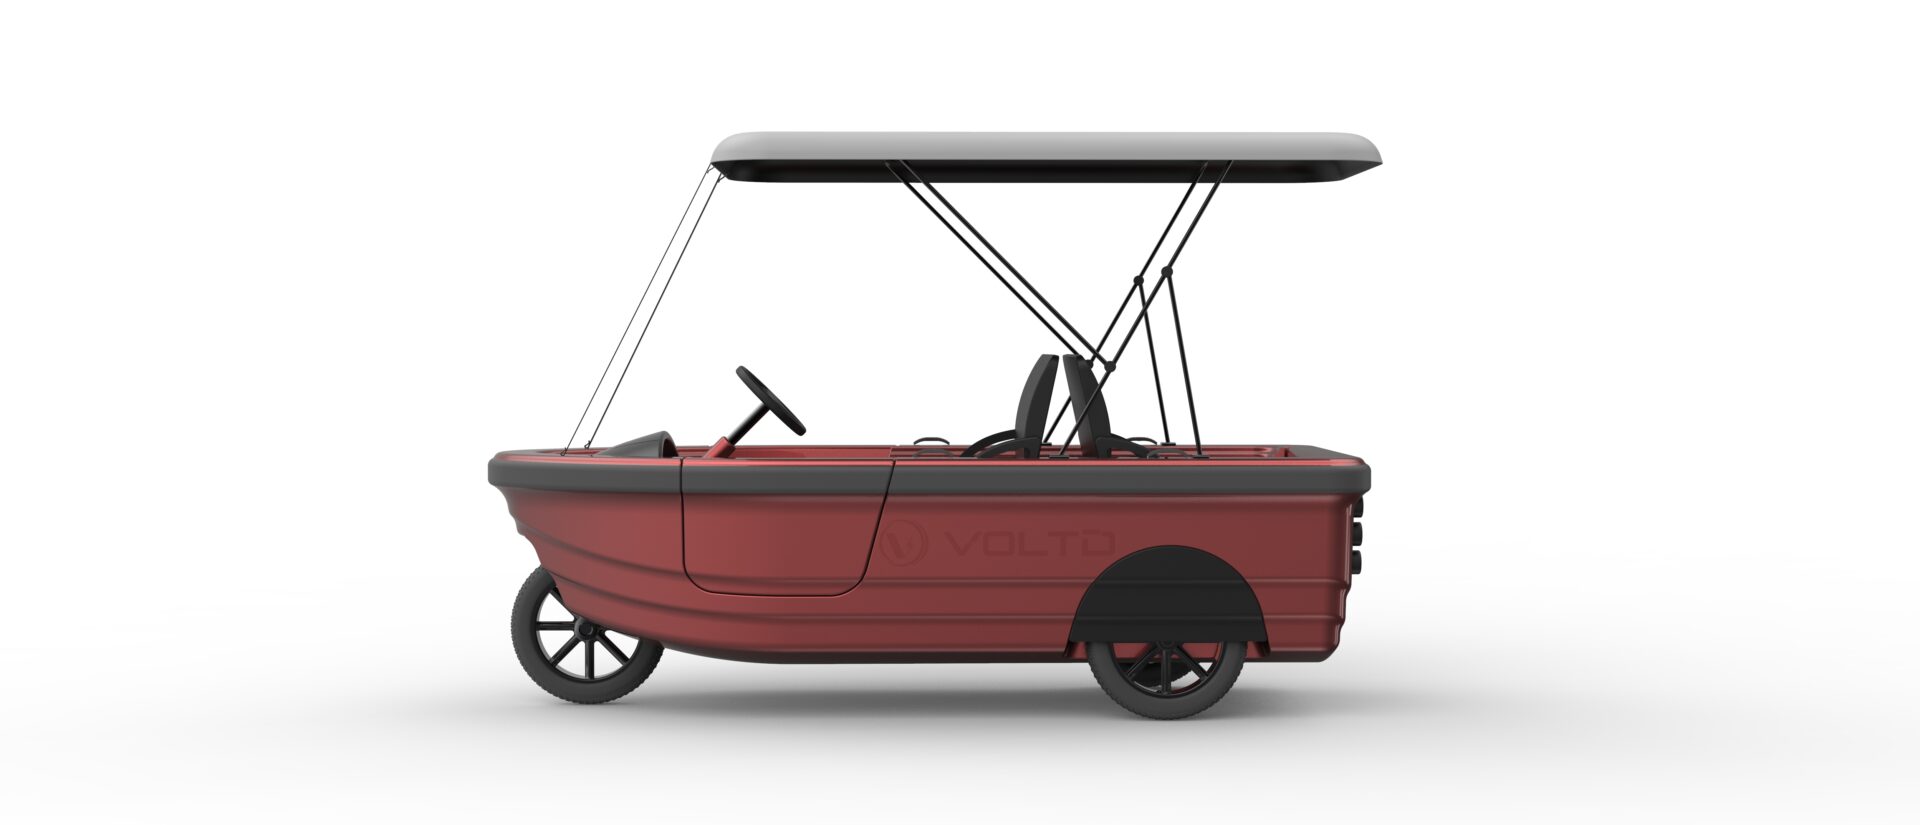 A red cart with a canopy on top.